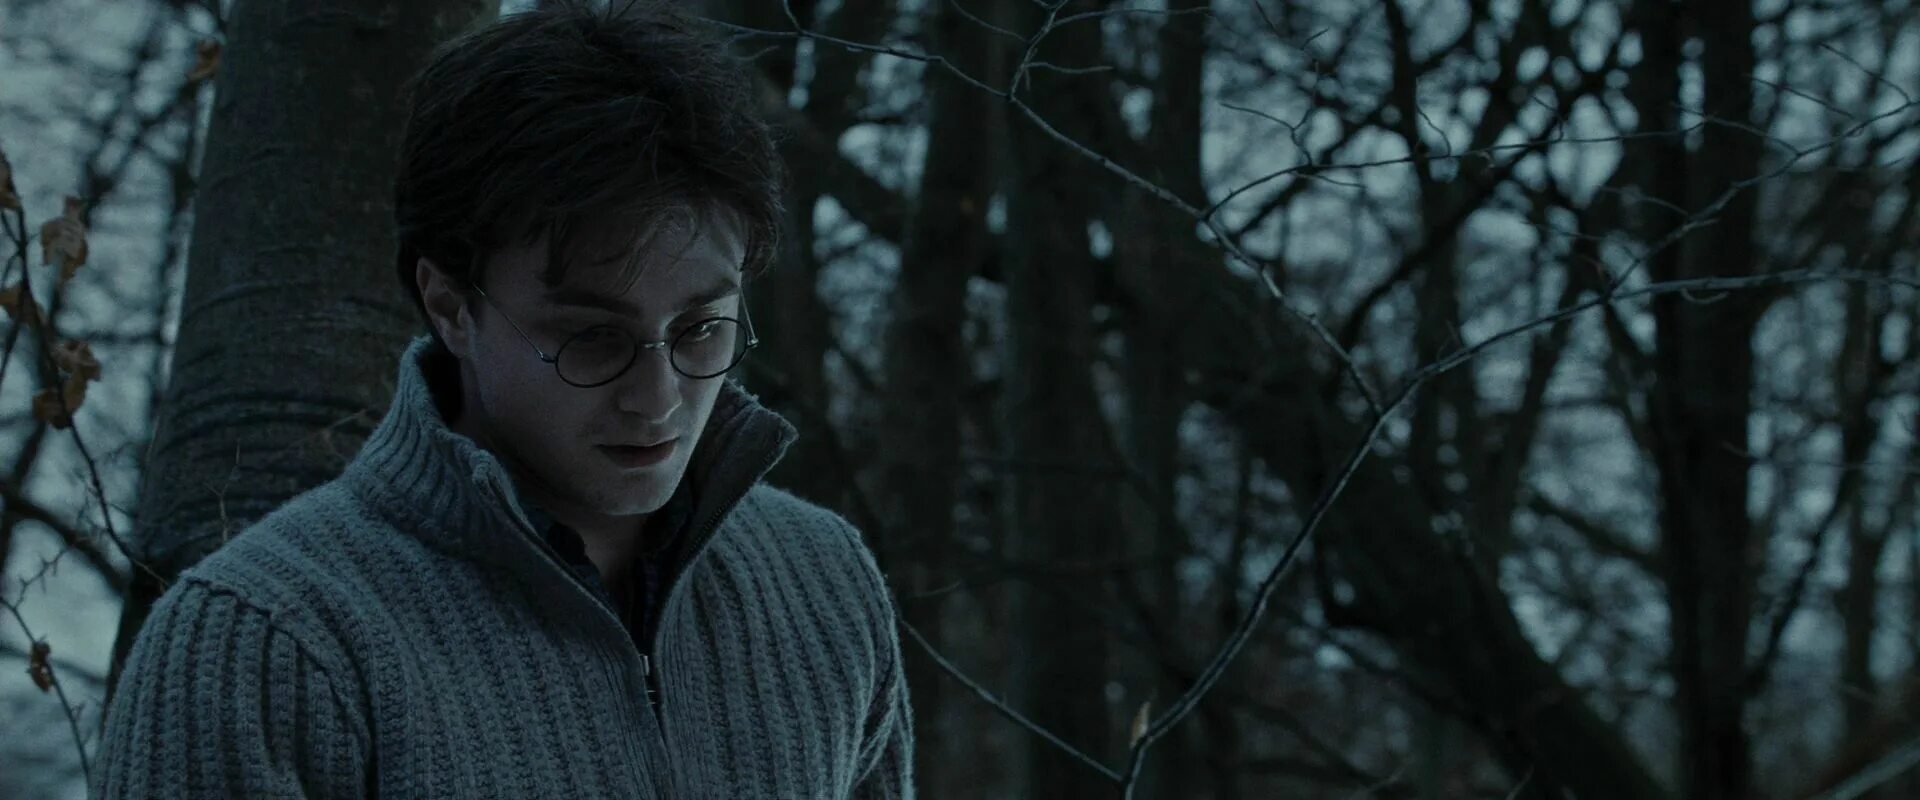 Harry Potter and the Deathly Hallows: Part 1 (2010). Аудиокниги дары смерти 1